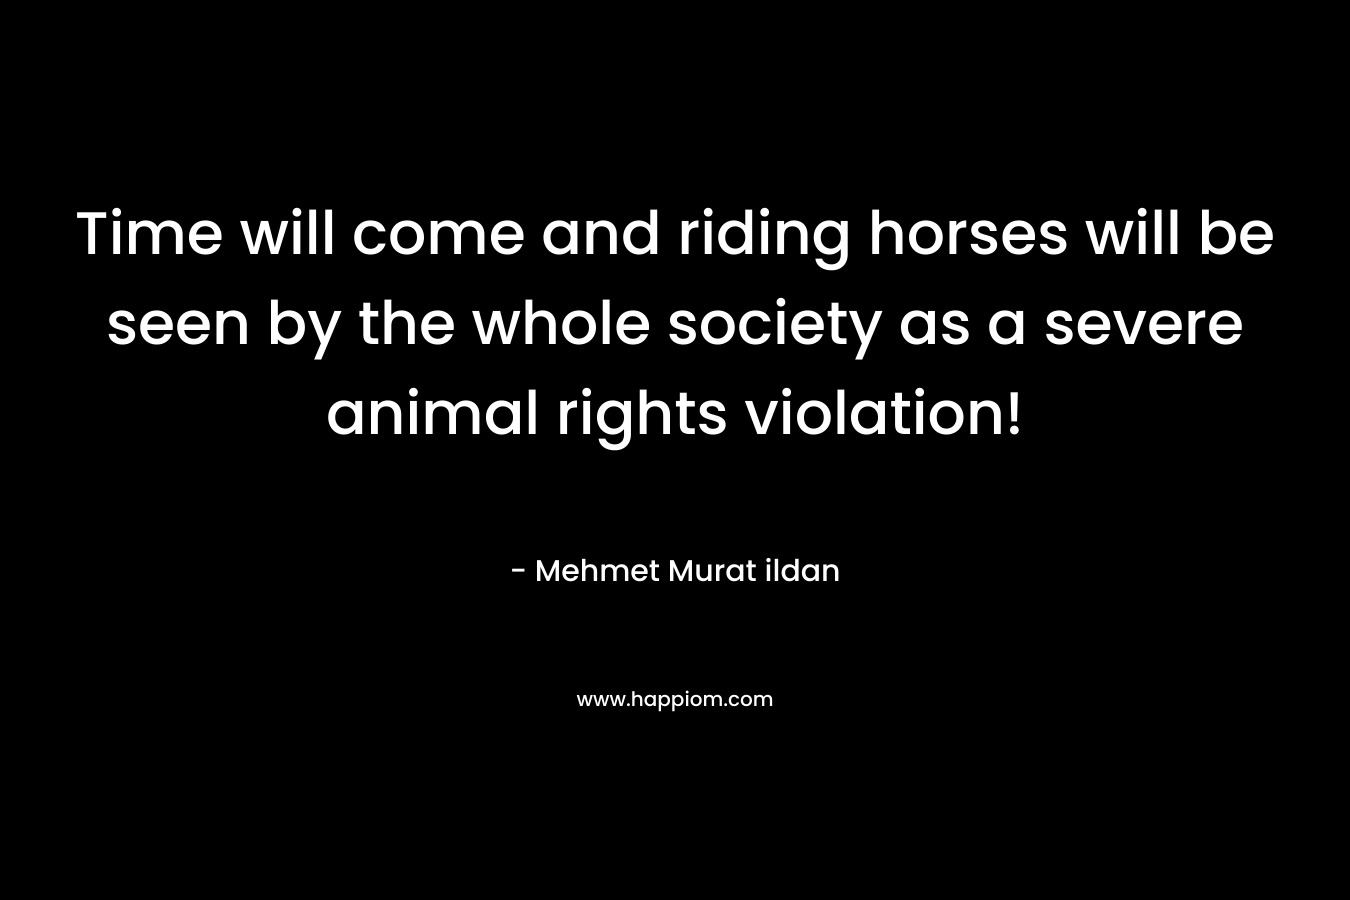 Time will come and riding horses will be seen by the whole society as a severe animal rights violation!